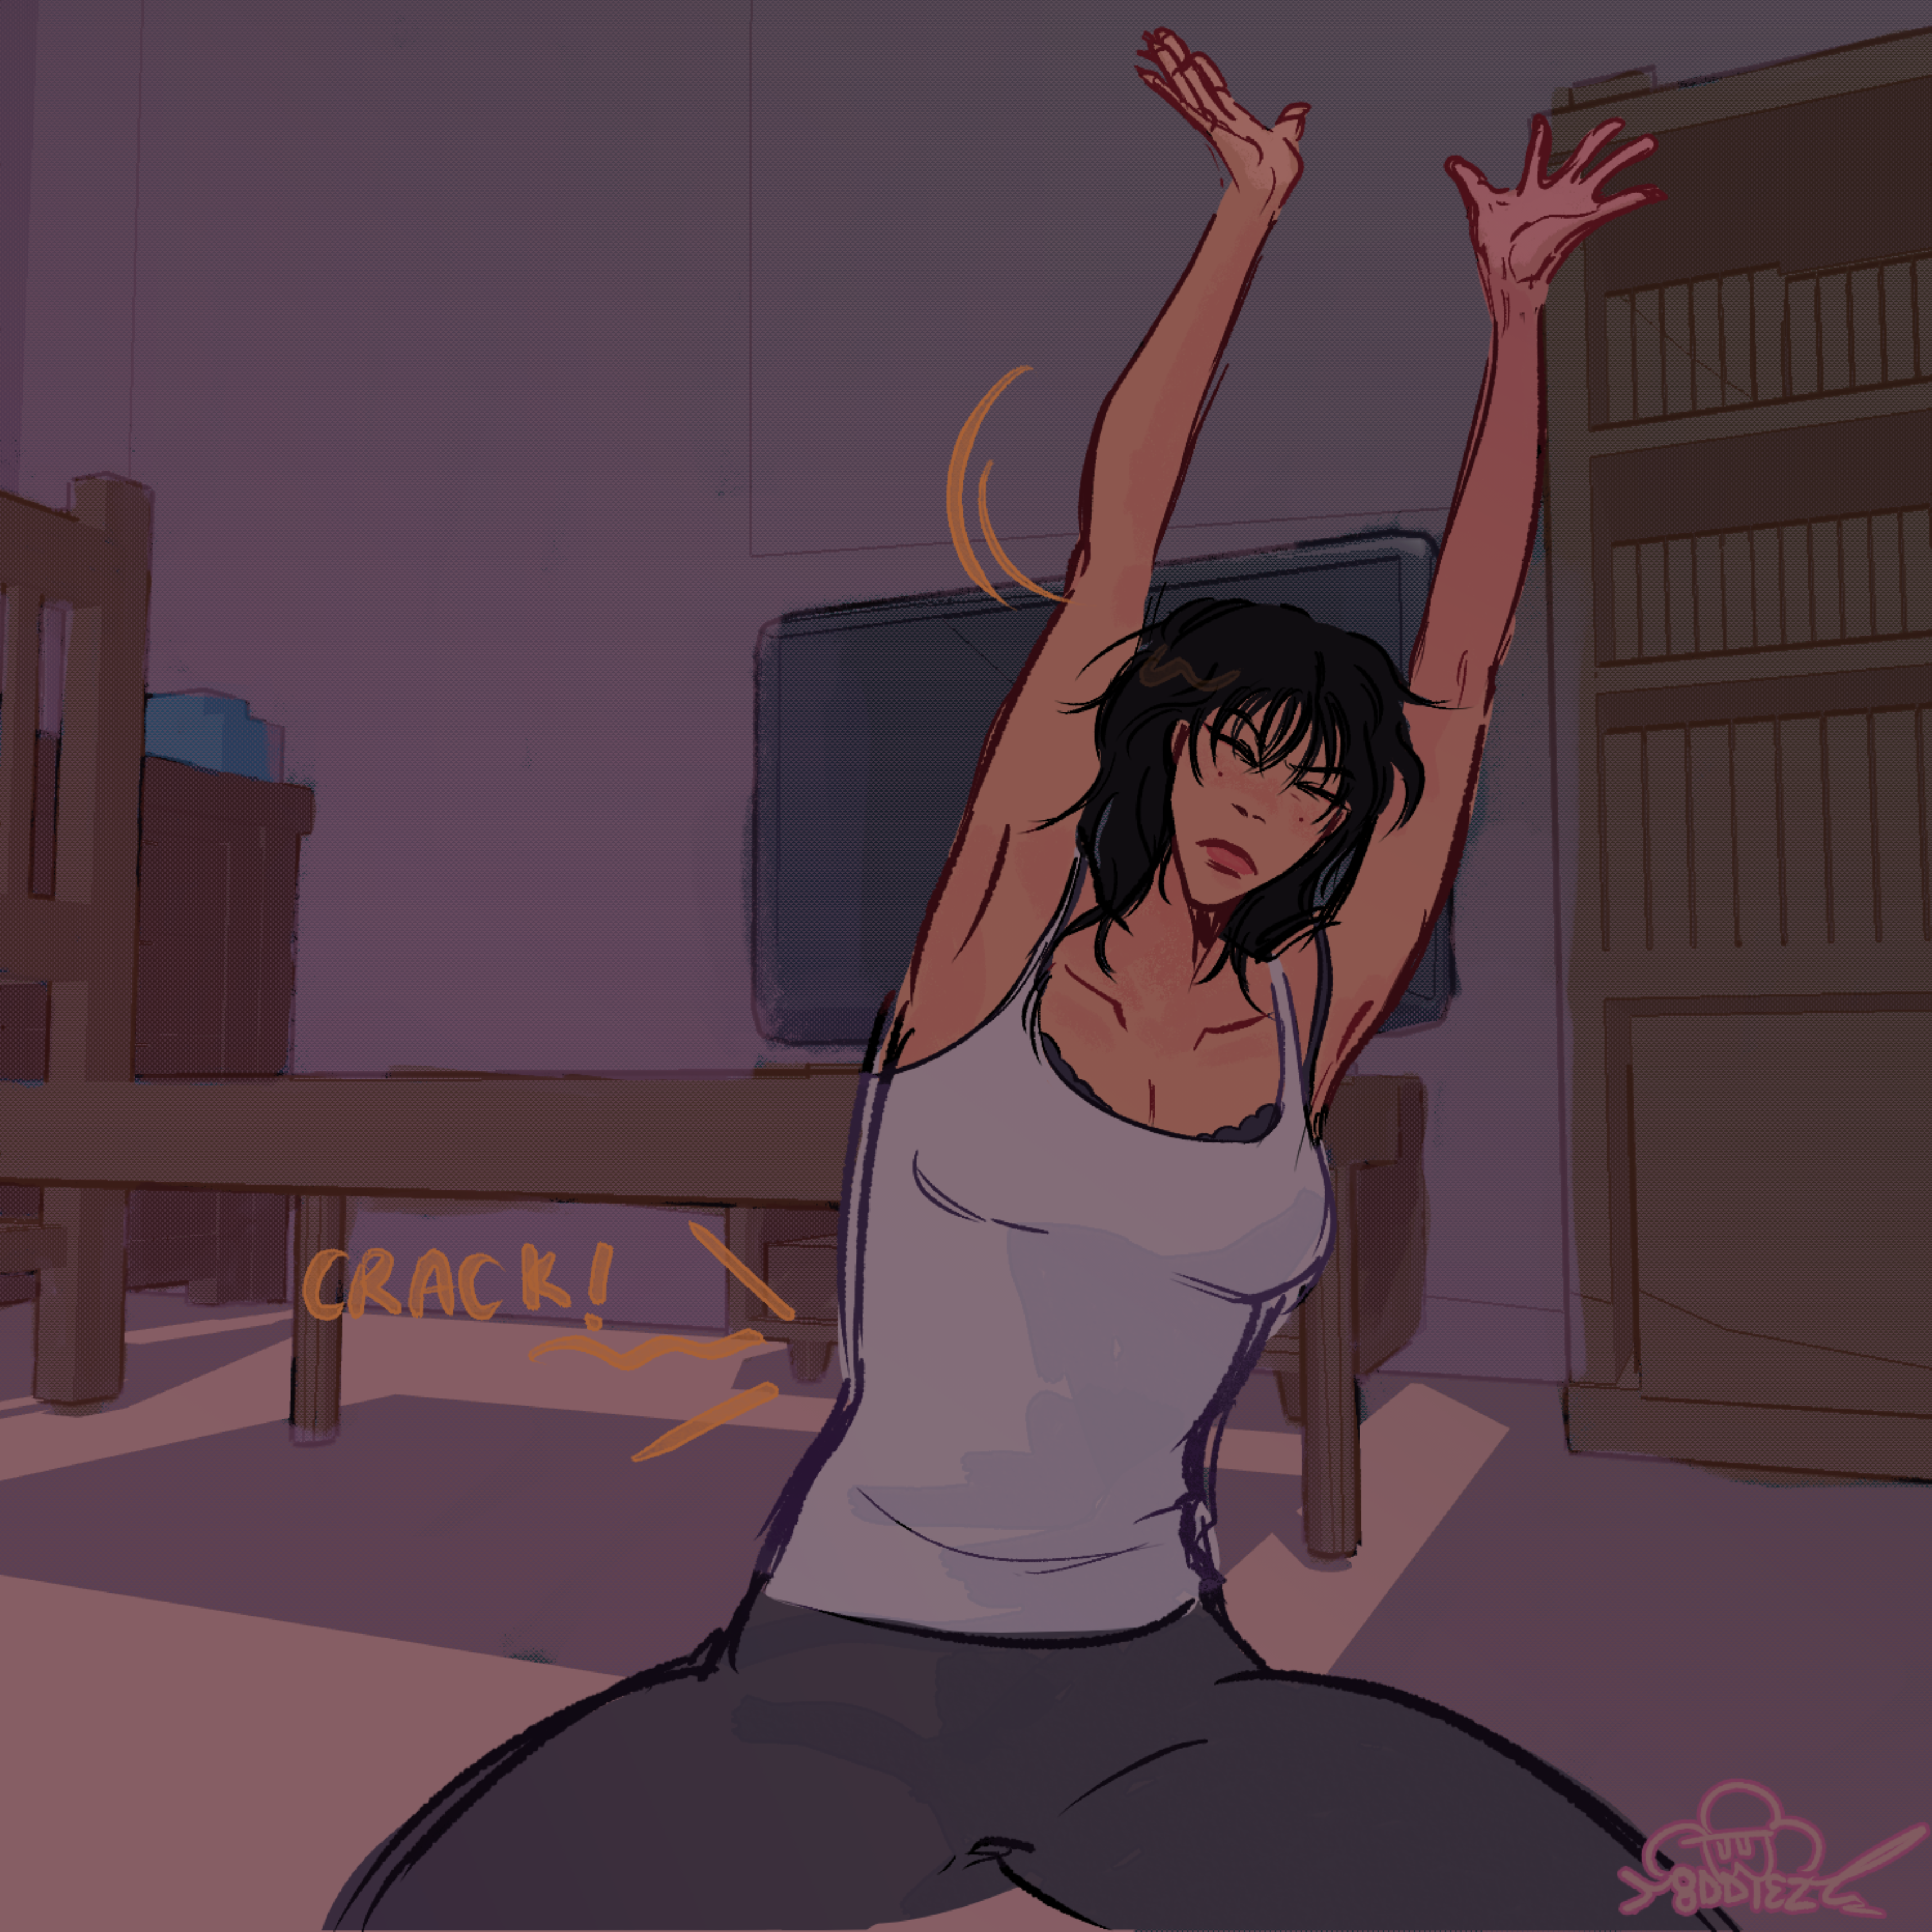 Image of Taylor stretching in her dorm